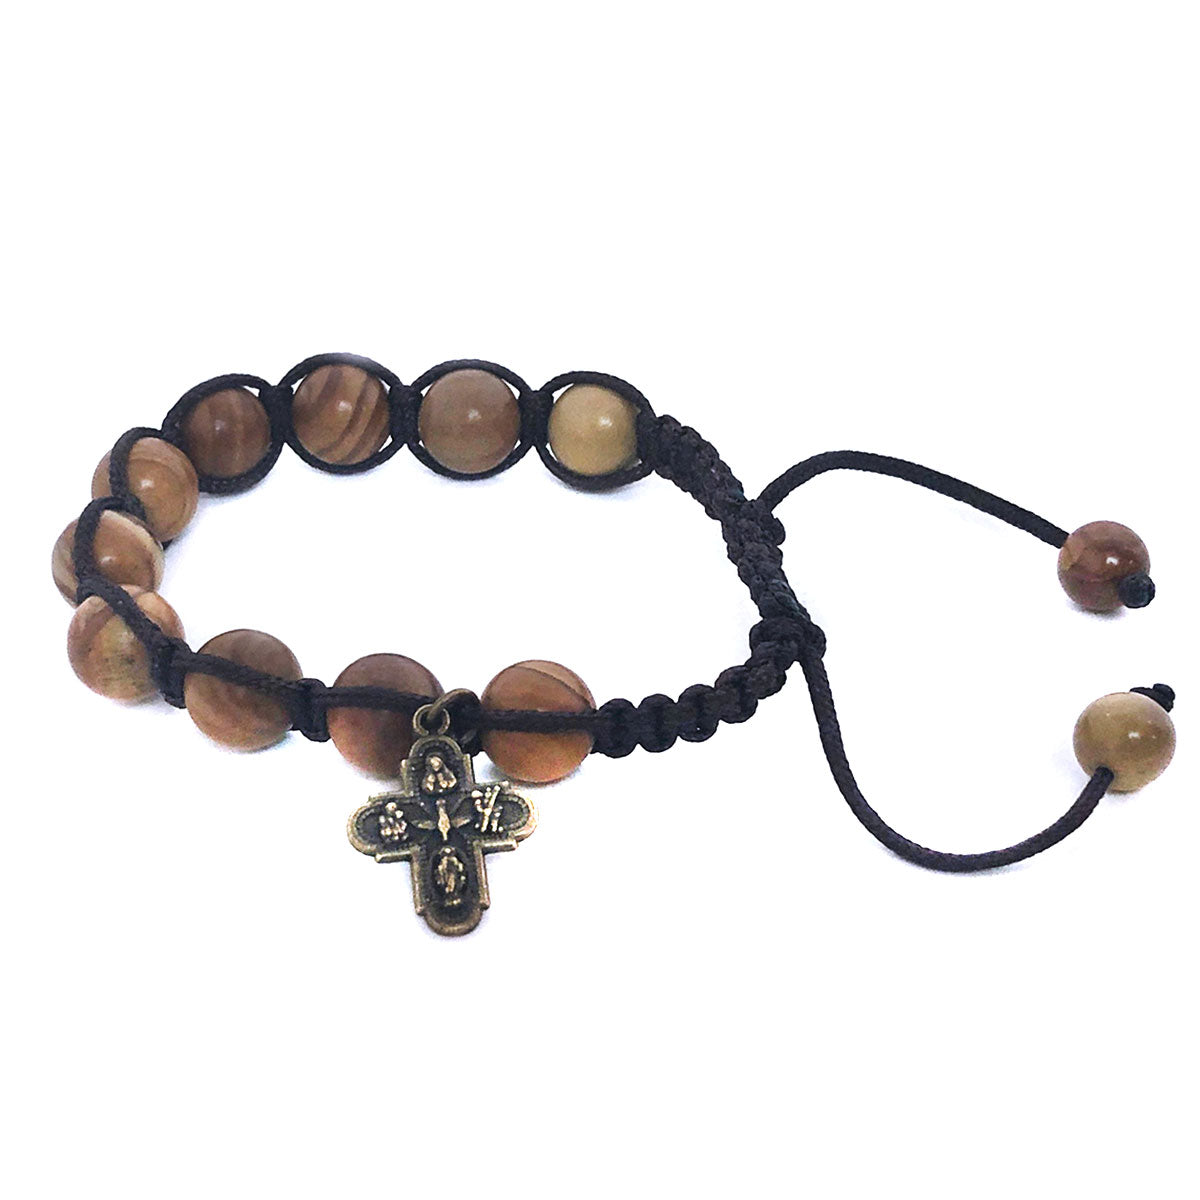 Padre Pio Wood and Stone Rosary and Rosary Bracelet Set by Catholic Heirlooms